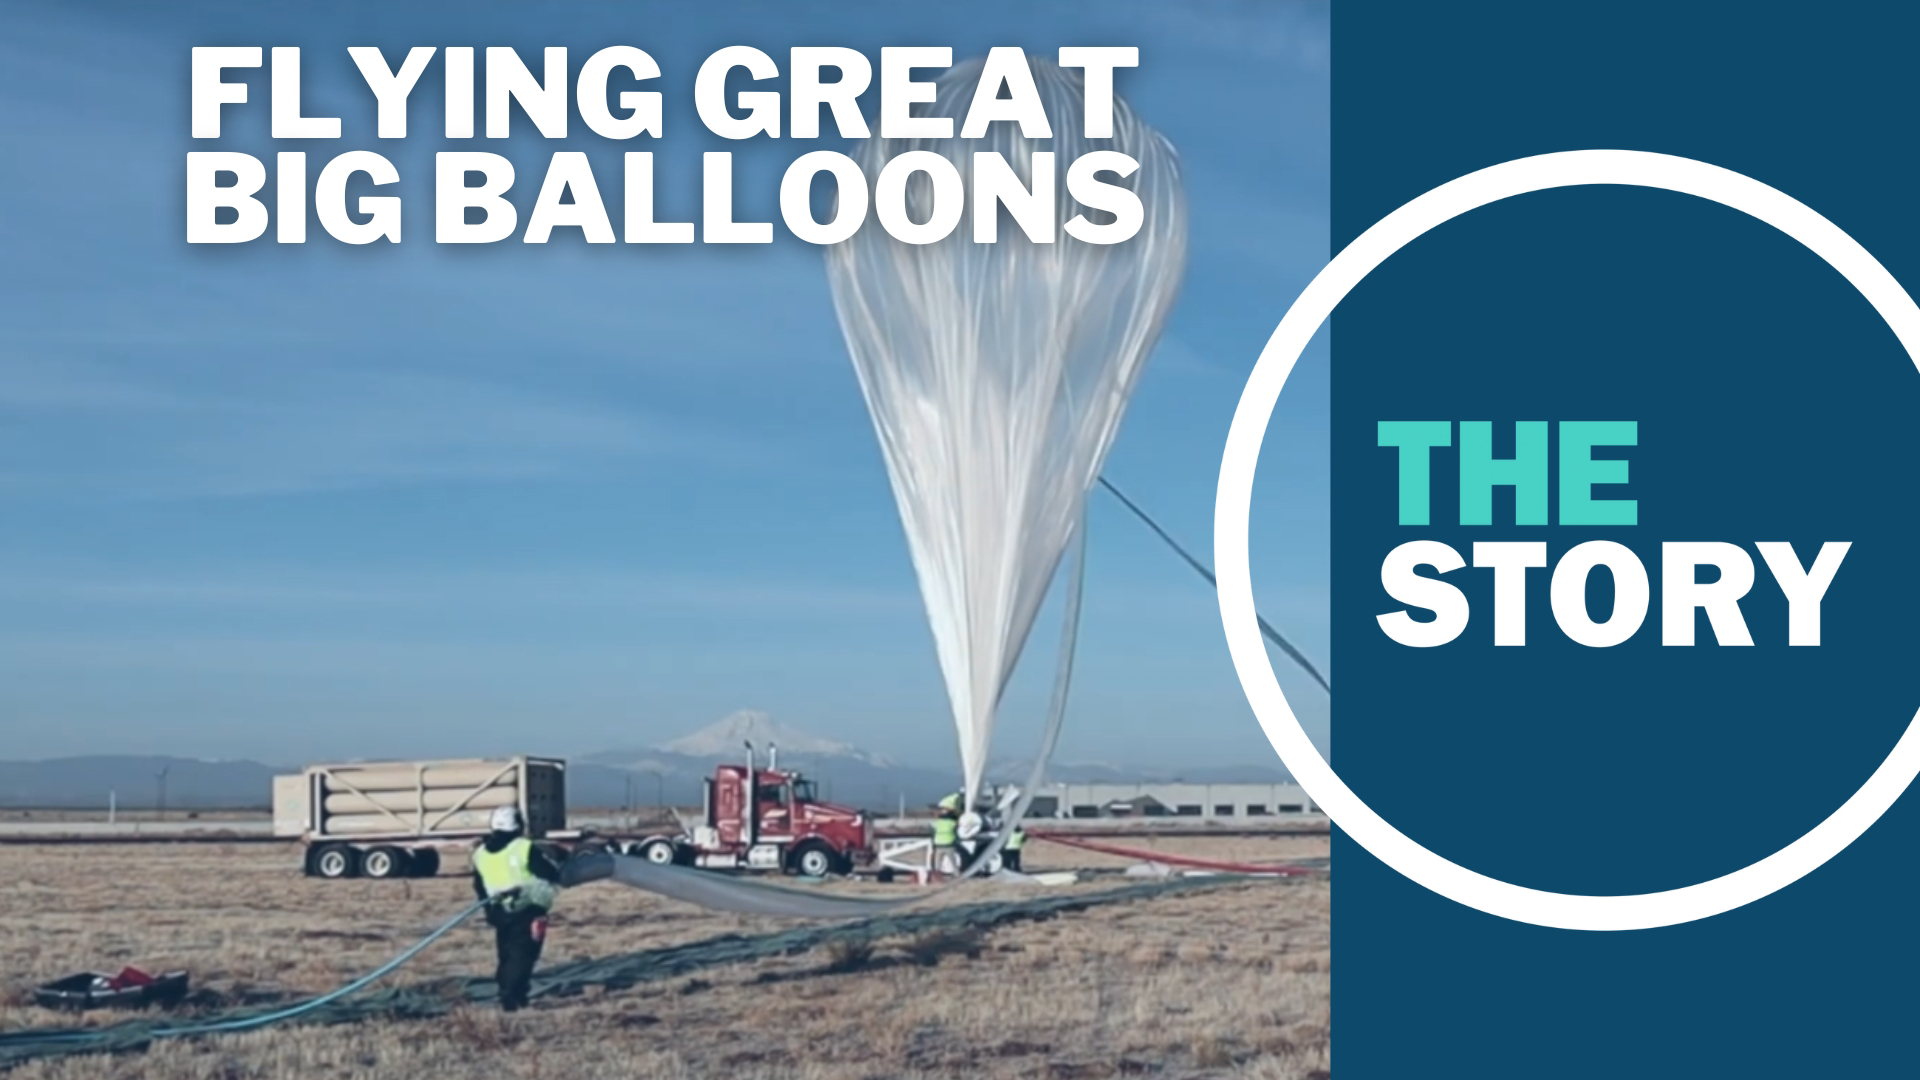 Oregon company flies huge high-altitude balloons for aerospace research